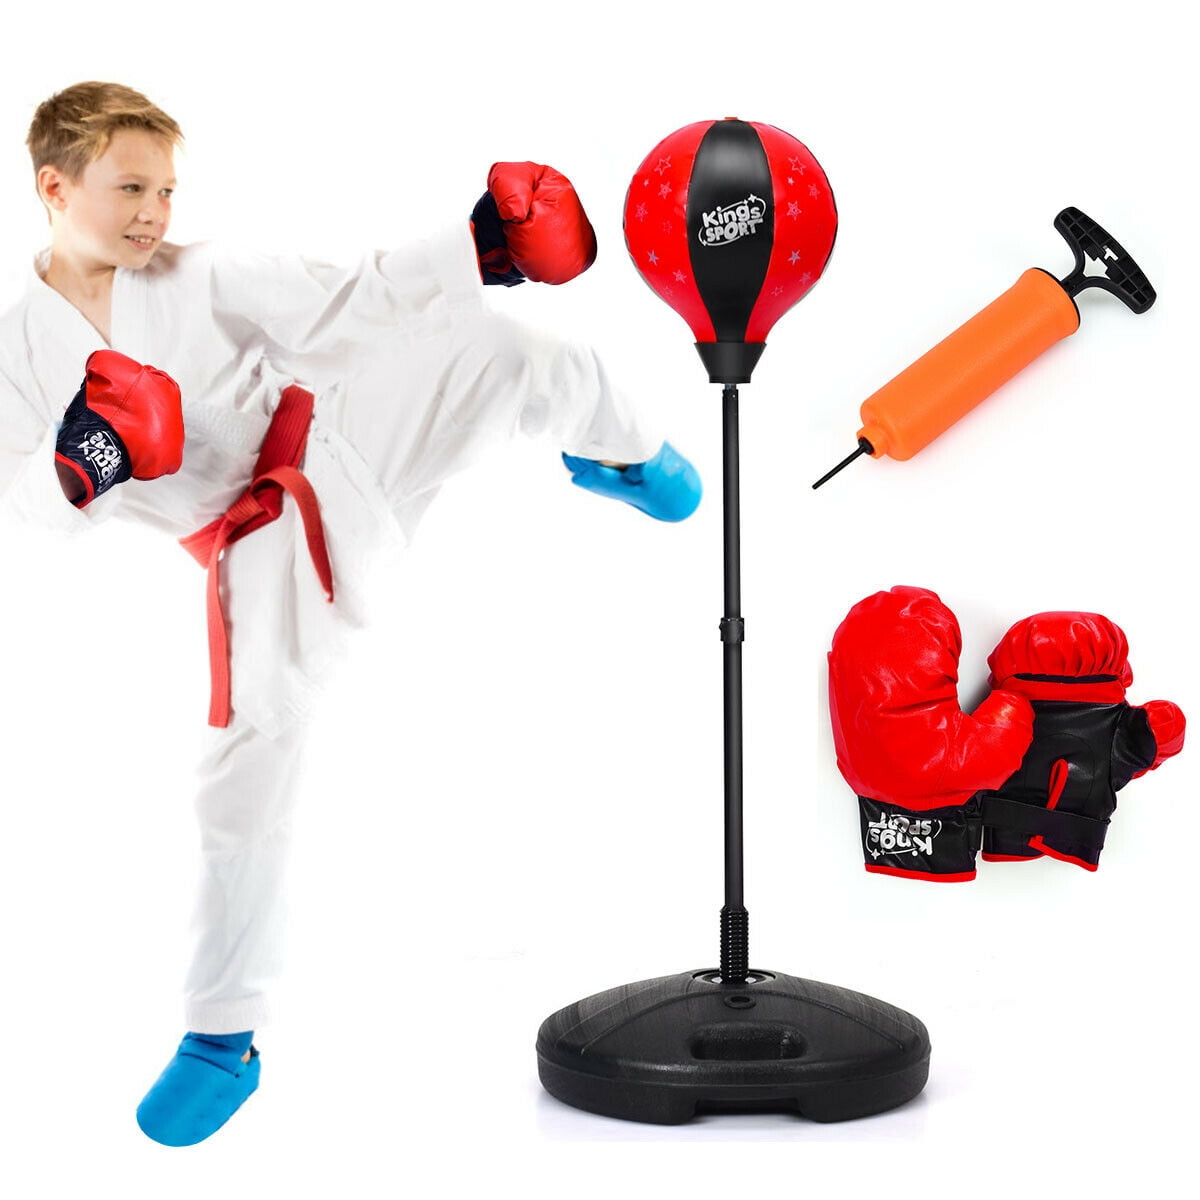 PUNCH BAG BALL AND MITTS GLOVES KIT BOXING GIFT SET FOR KIDS JUNIOR FREE STAND T 